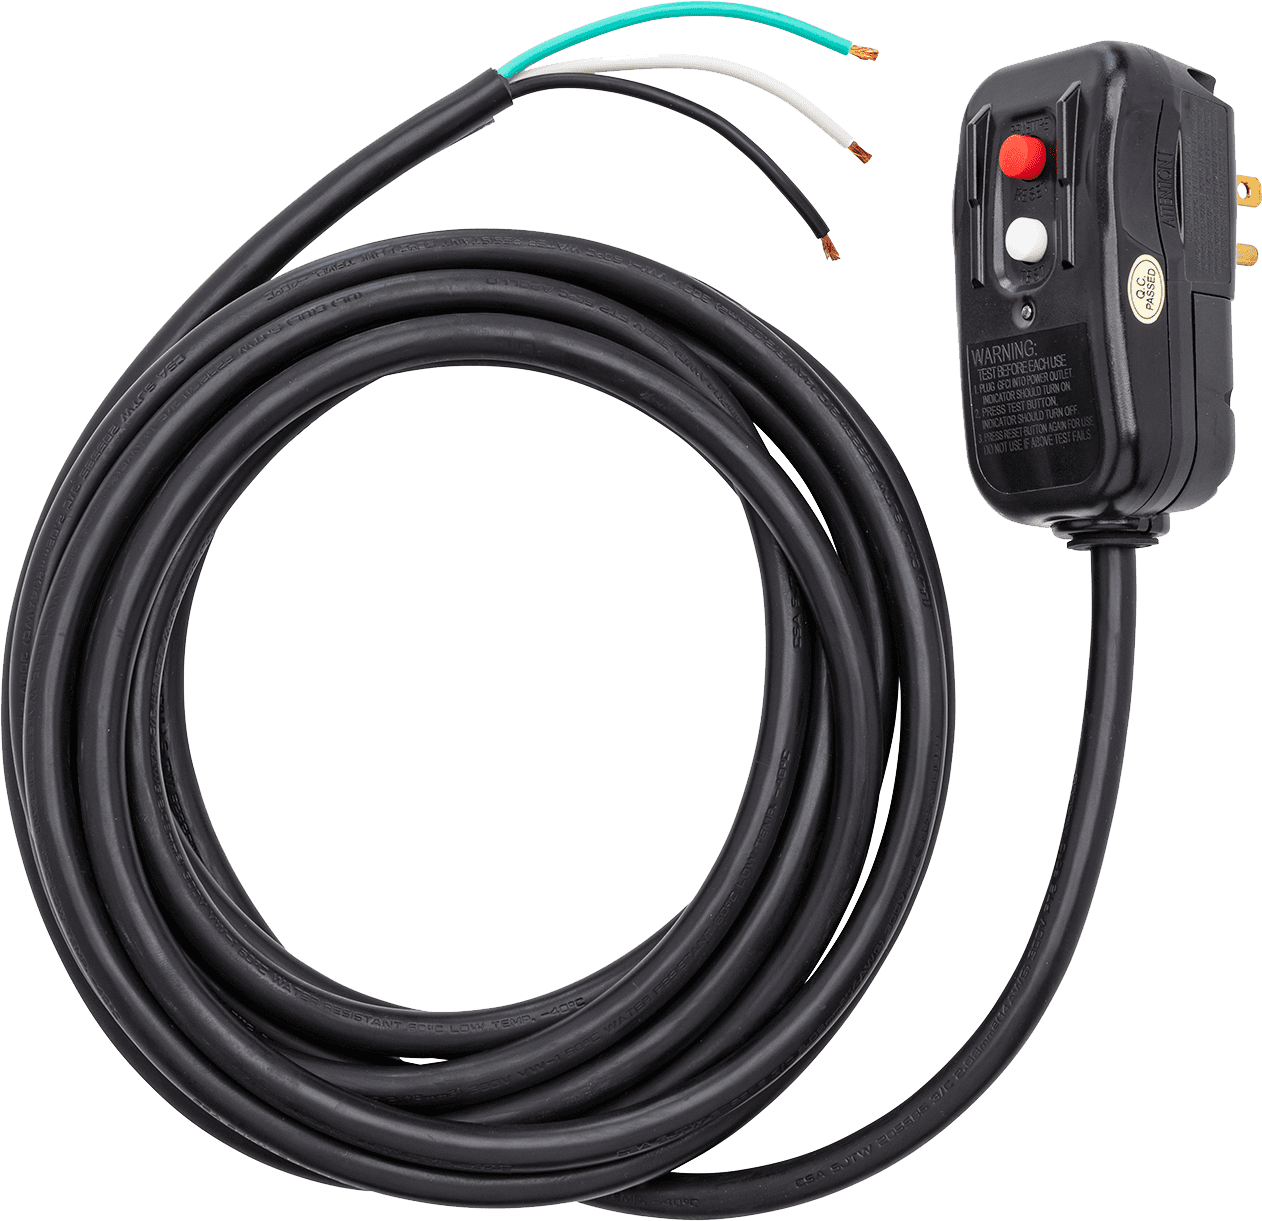 GFCI safety extension cord